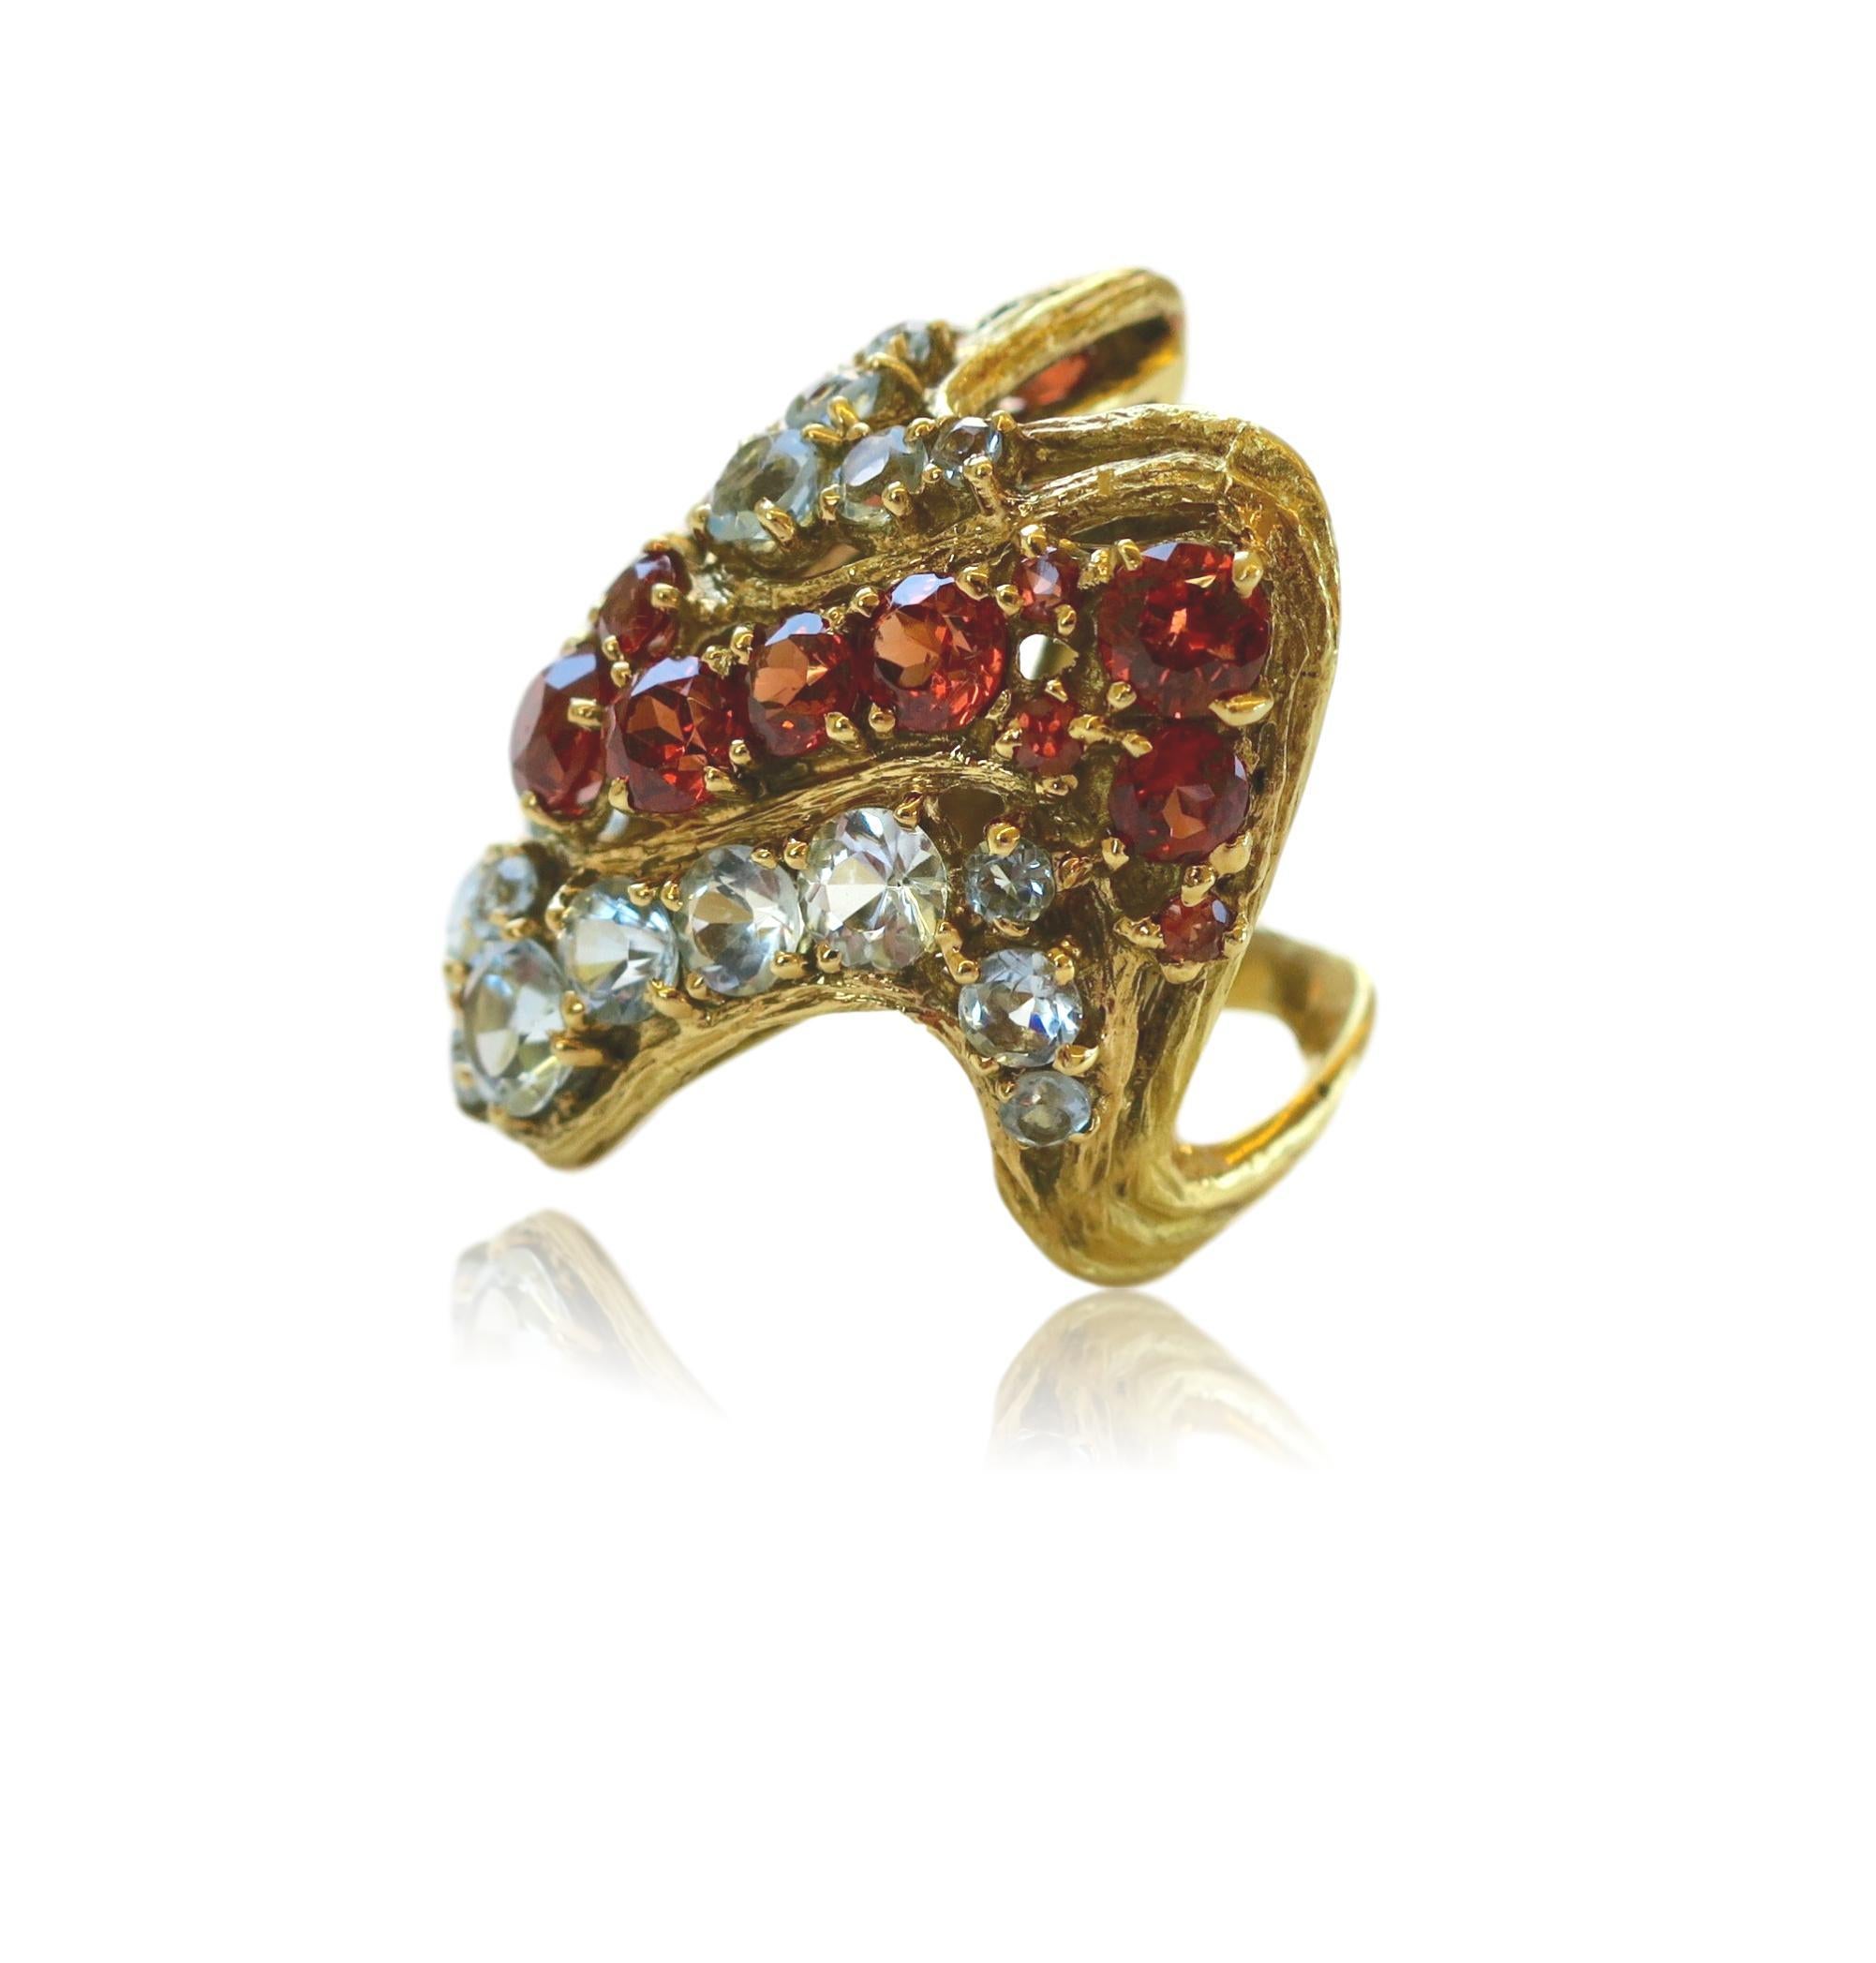 Anglo-Indian H. Stern Aquamarine and Hessonite Garnet Statement Ring, 1970s